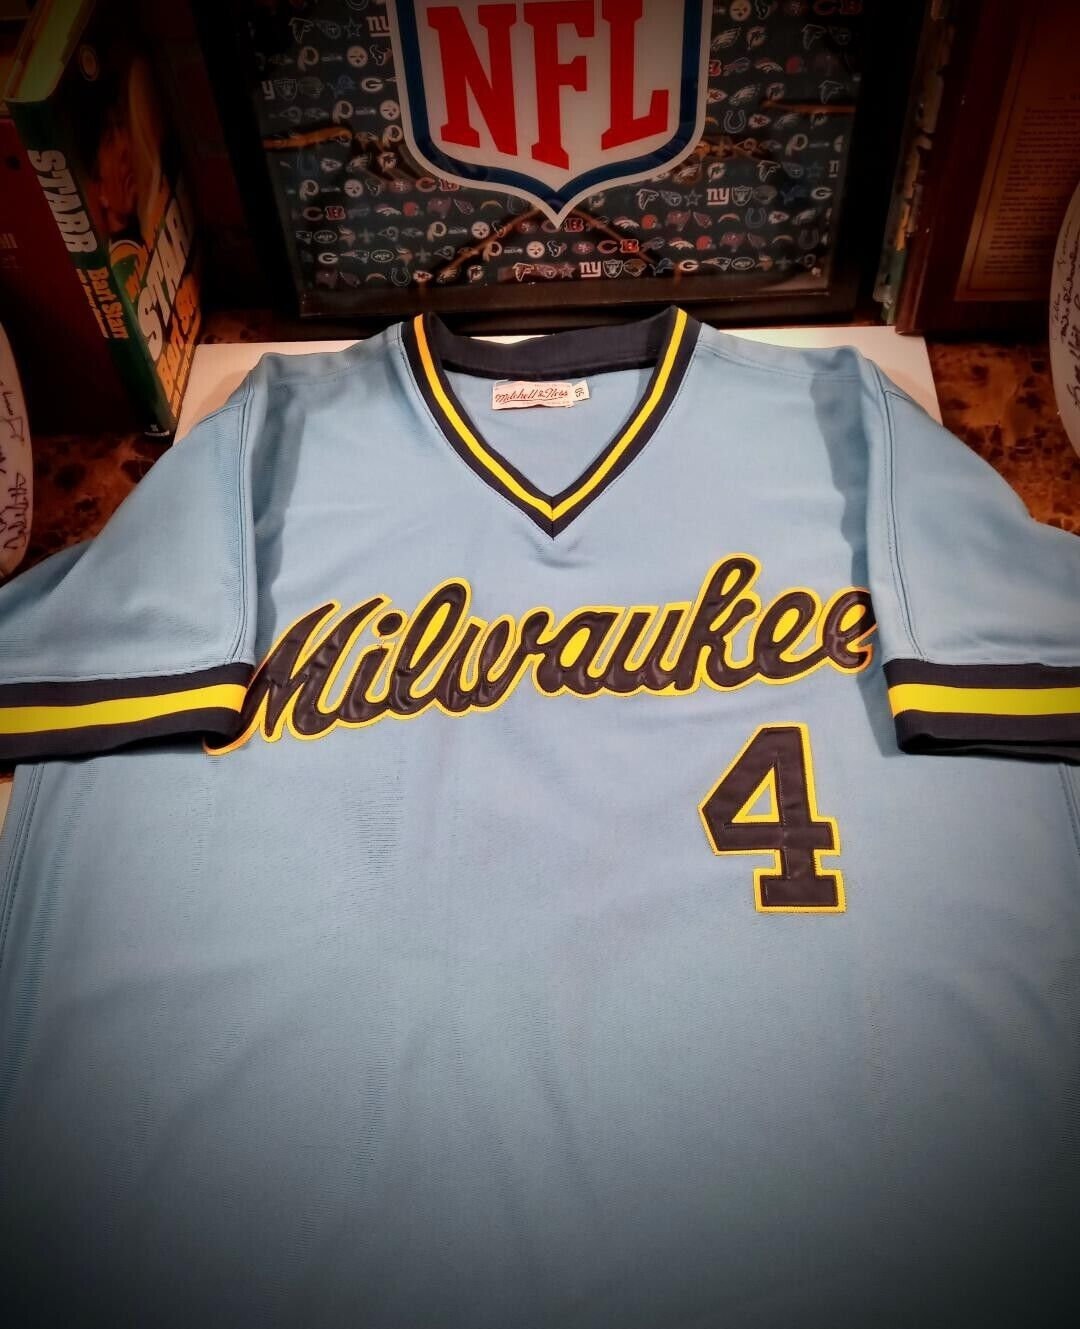 44 HANK AARON Milwaukee Brewers MLB OF/DH Blue Throwback Jersey